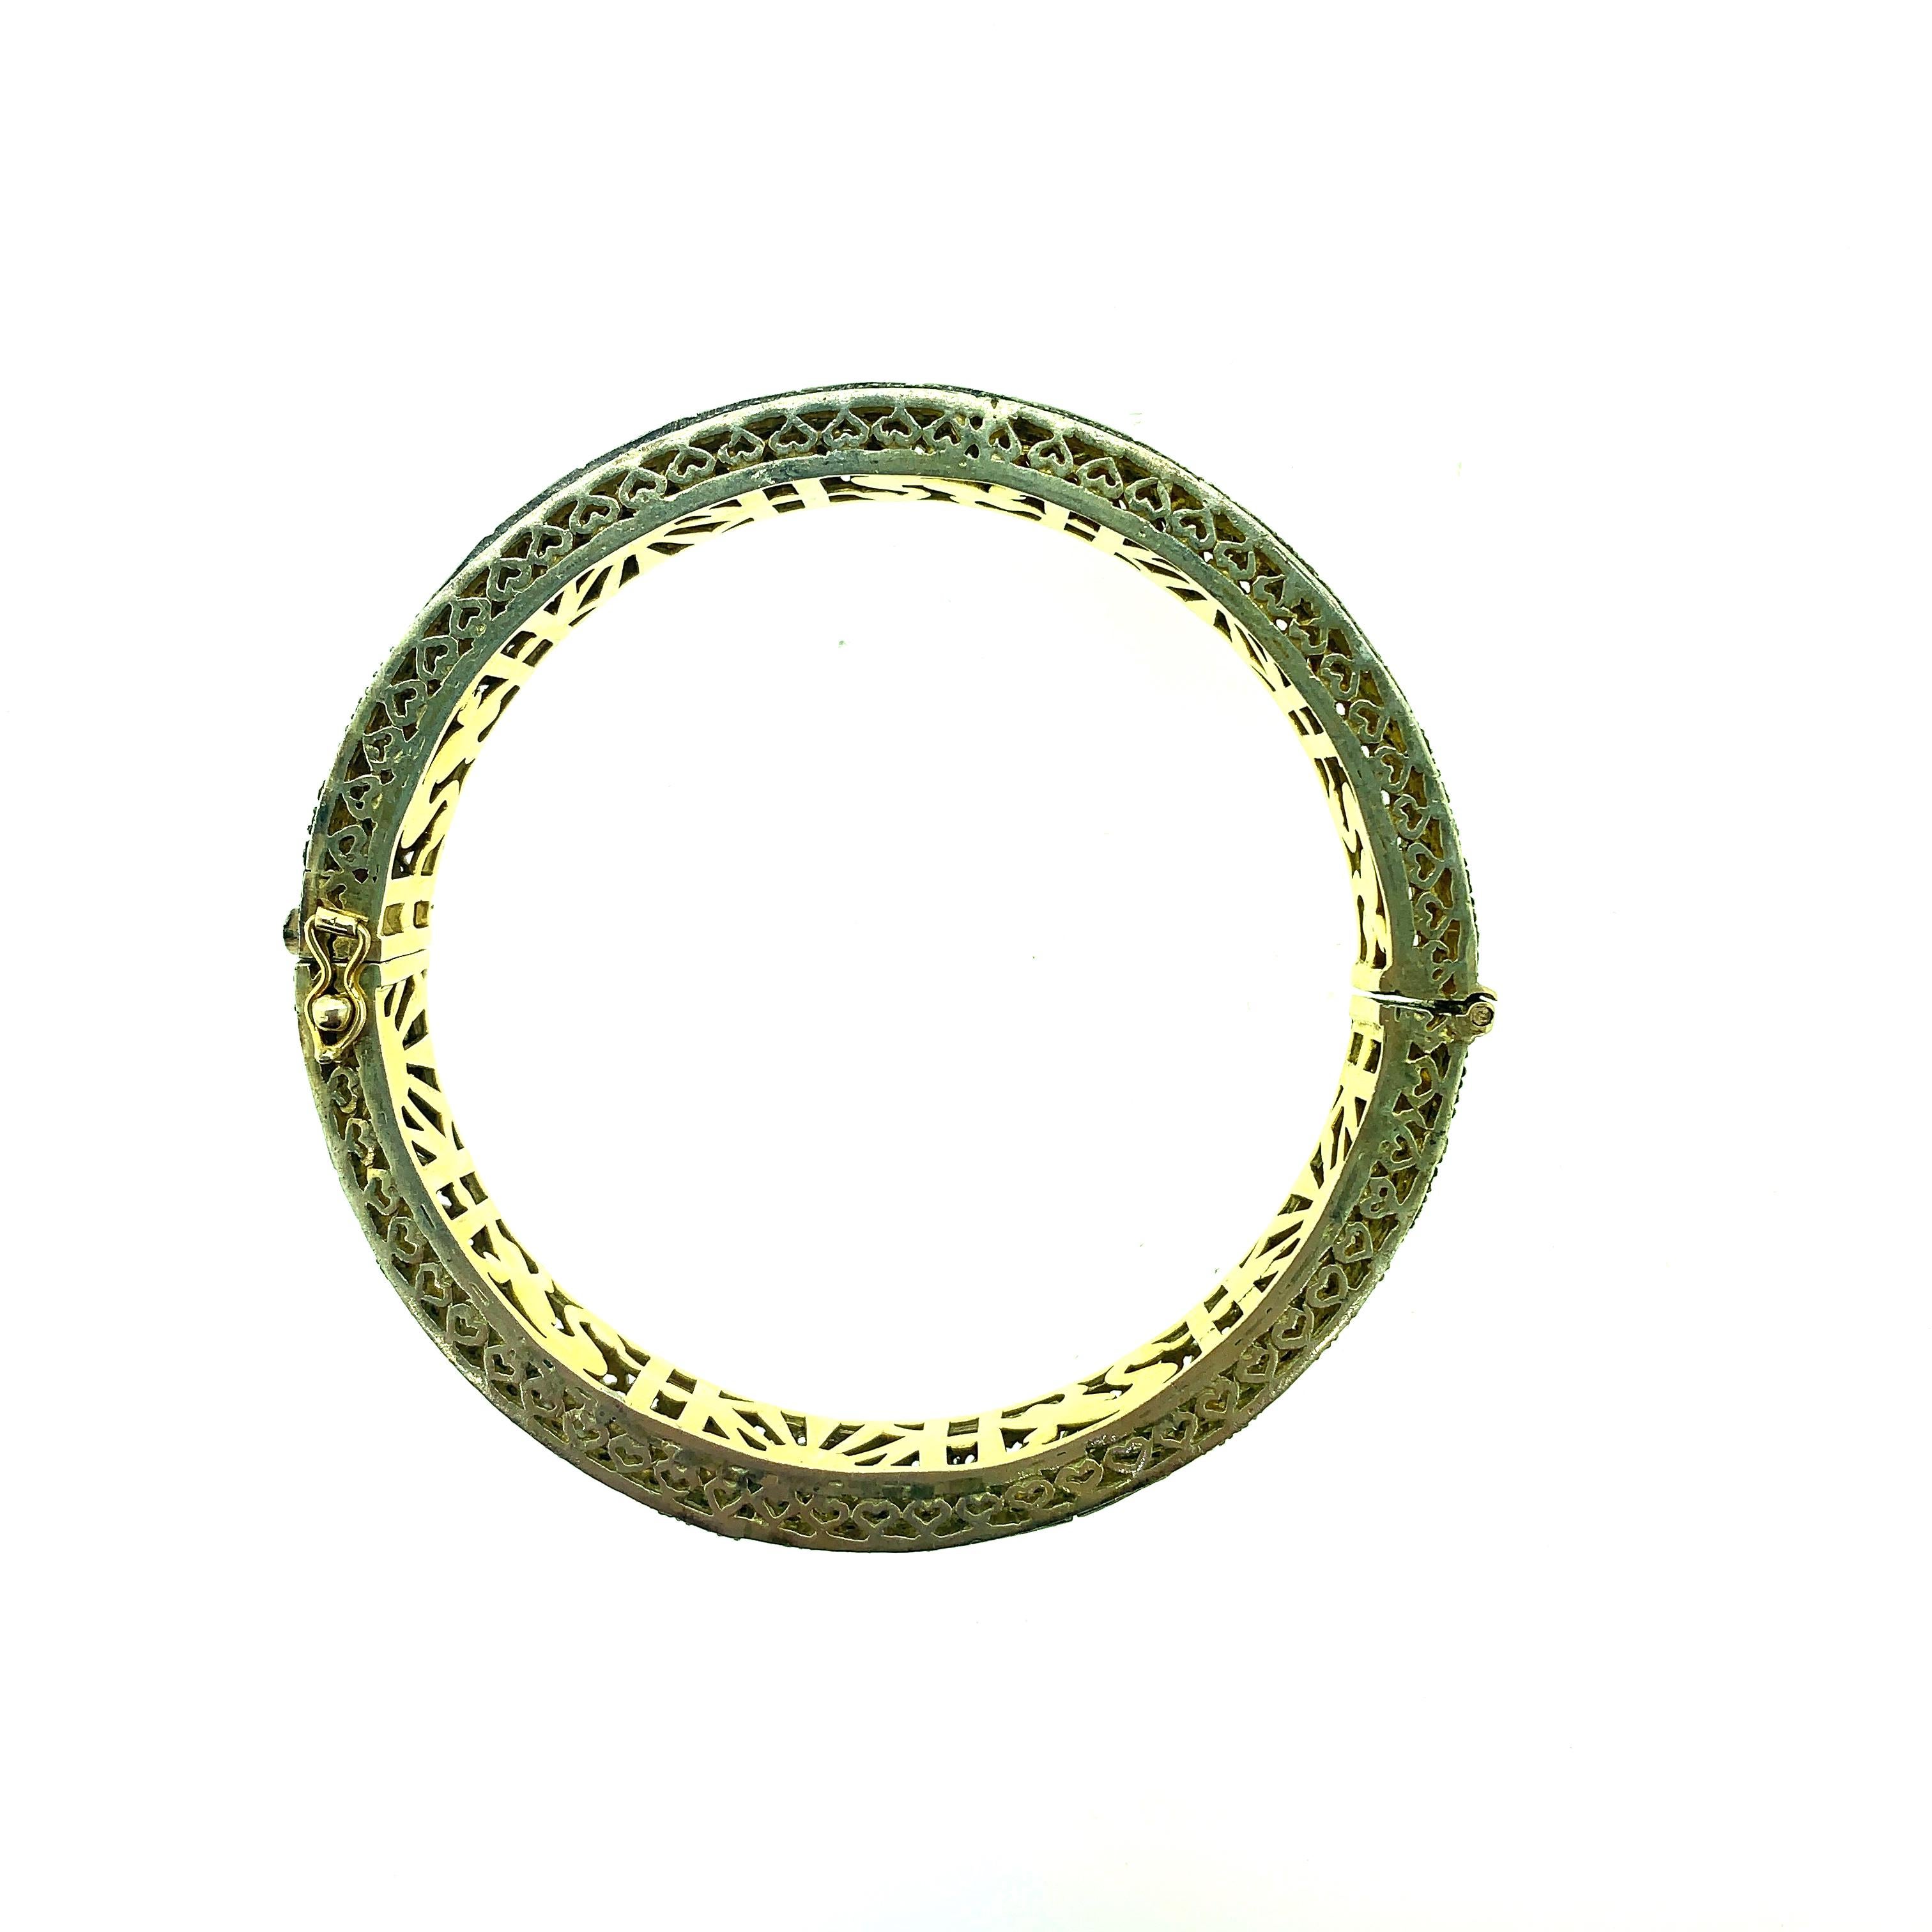 5.16 ct Old Mine Cut (Polki Diamond) Bangle set in Oxidized Sterling Silver with pure 14K Gold. The bangle diameter is 2.6 Inch with a row of Old Mine Cut Diamond in the center and surrounded by lines of pave diamond on each side. It is a